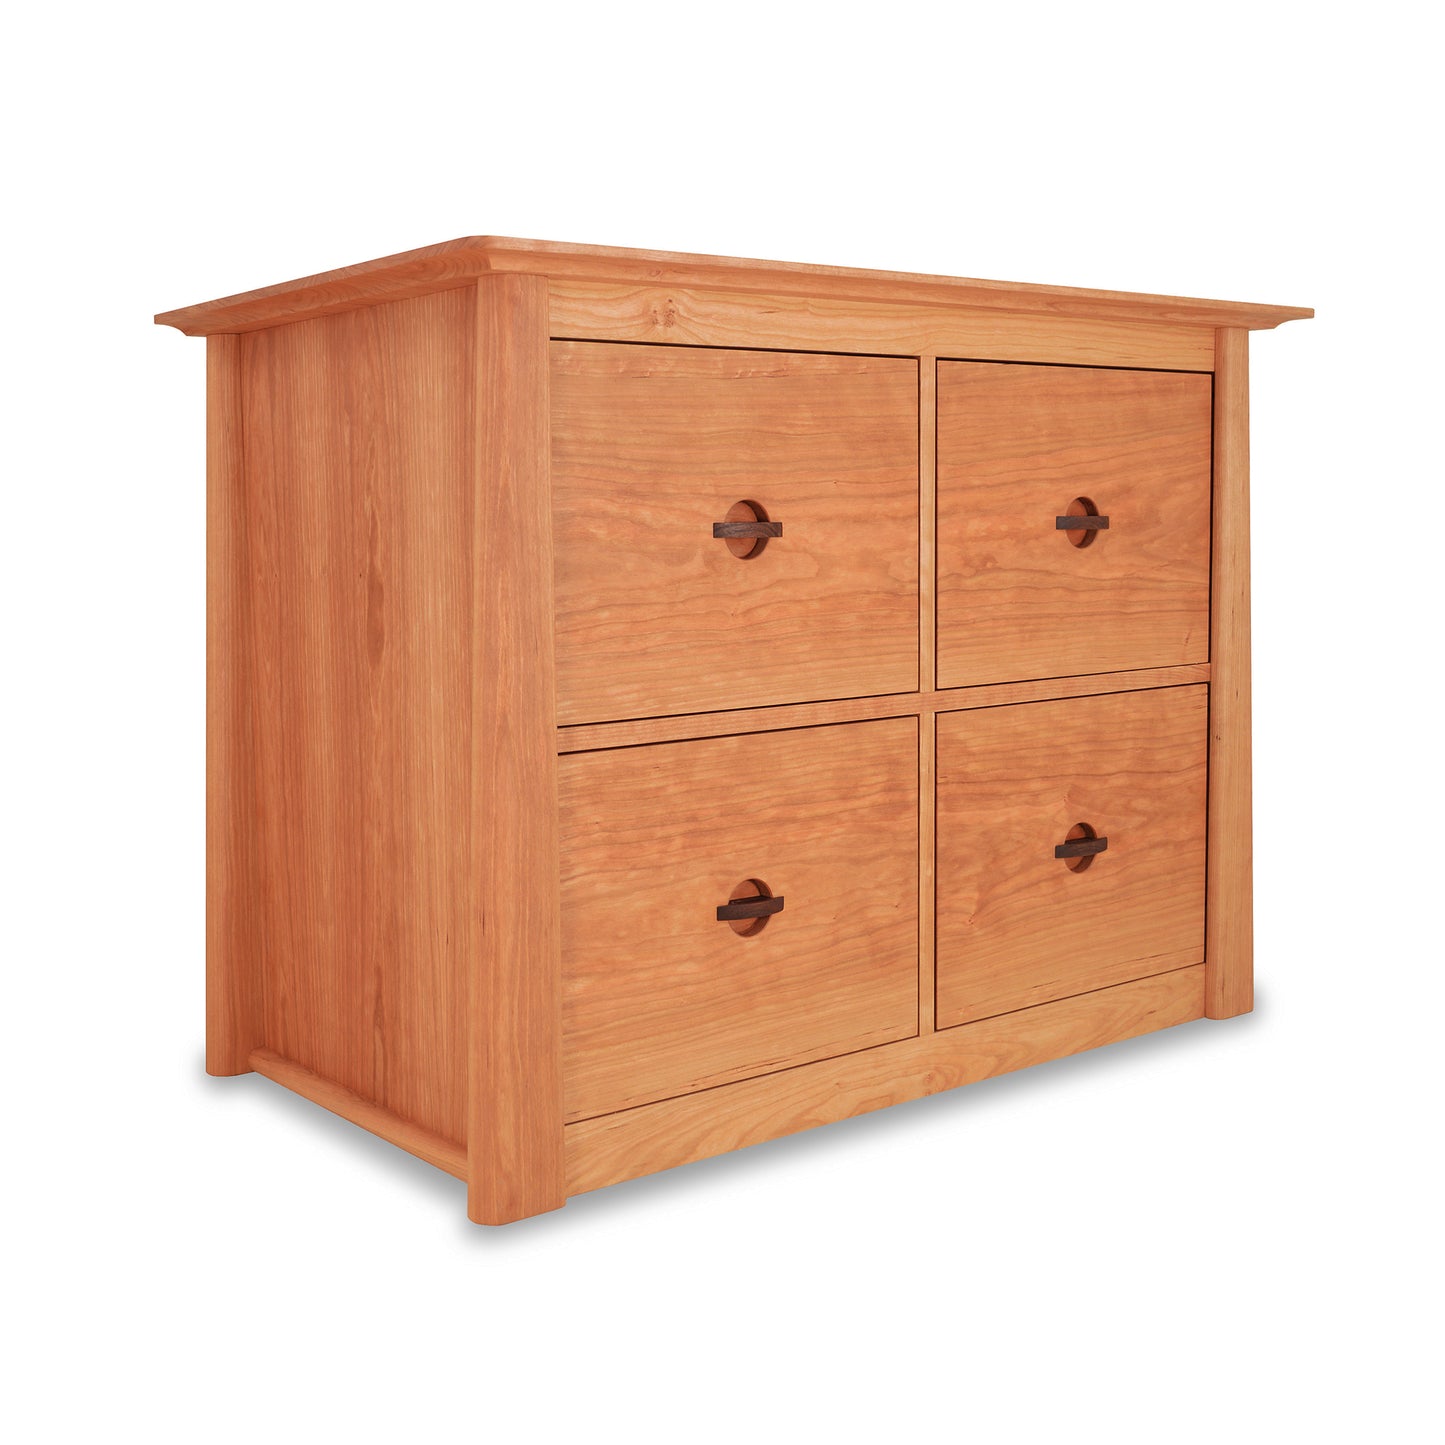 A Maple Corner Woodworks Cherry Moon 4-Drawer File Credenza.